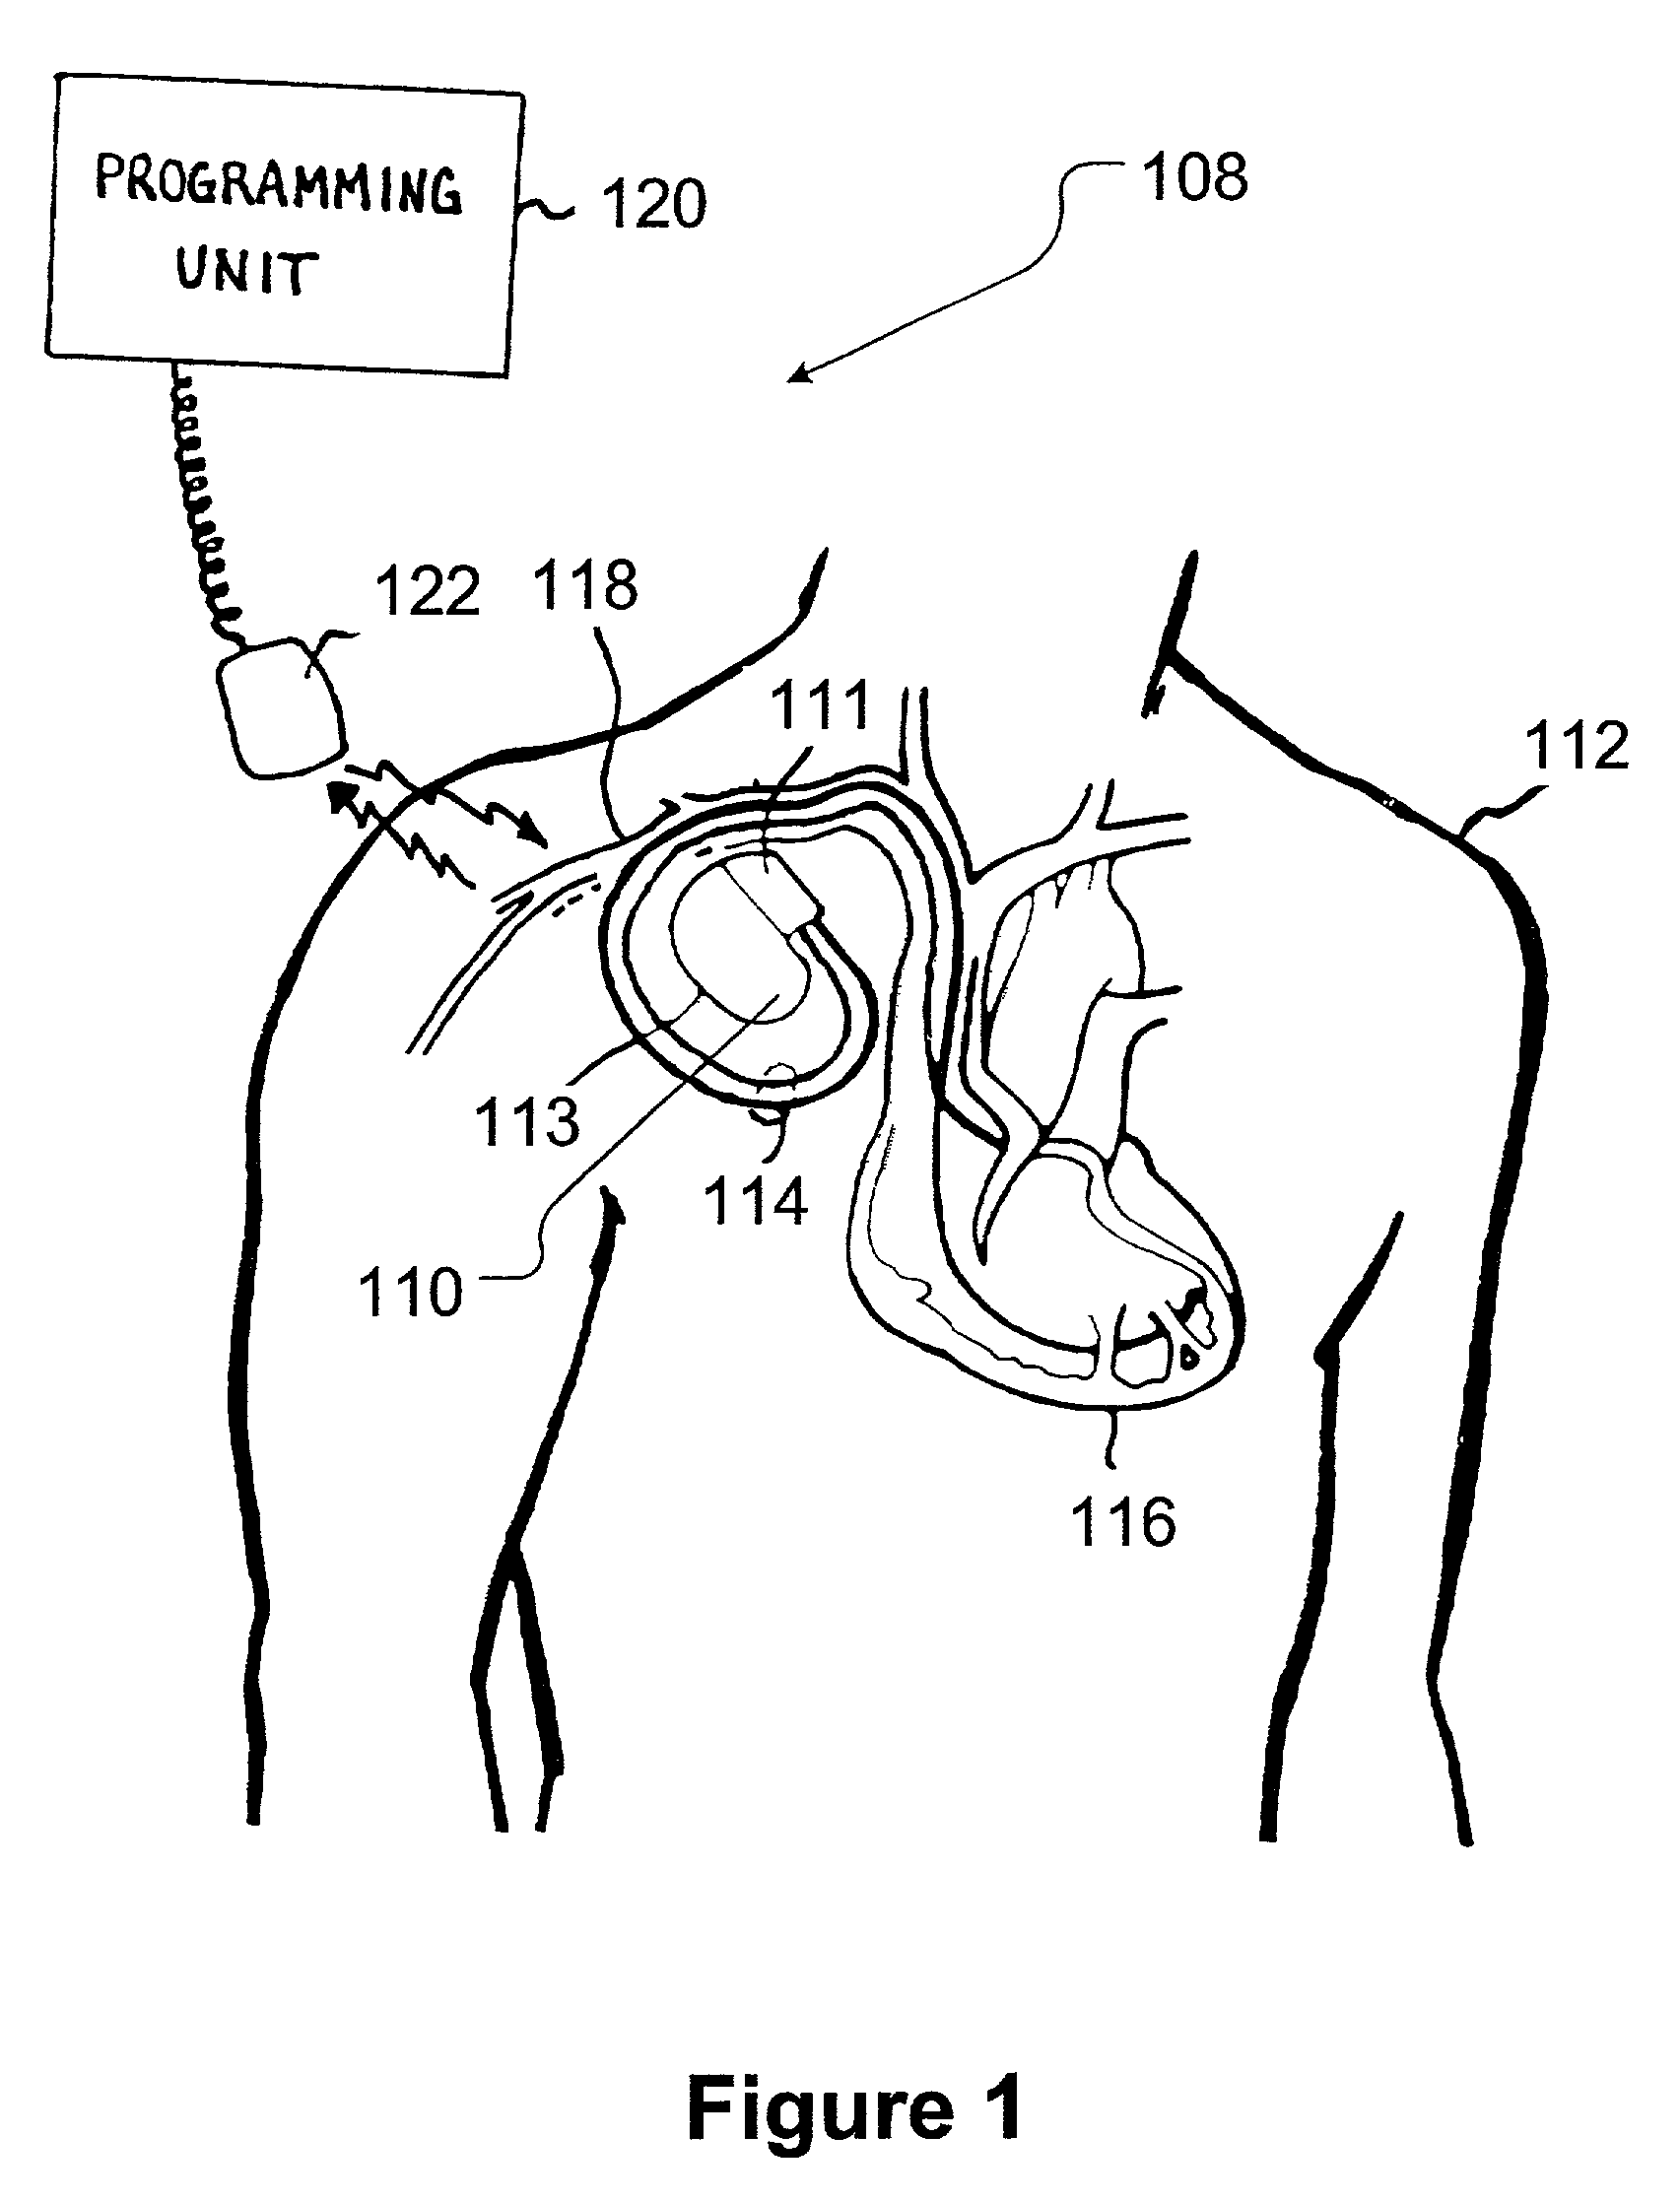 Device for sensing cardiac activity in an implantable medical device in the presence of magnetic resonance imaging interference